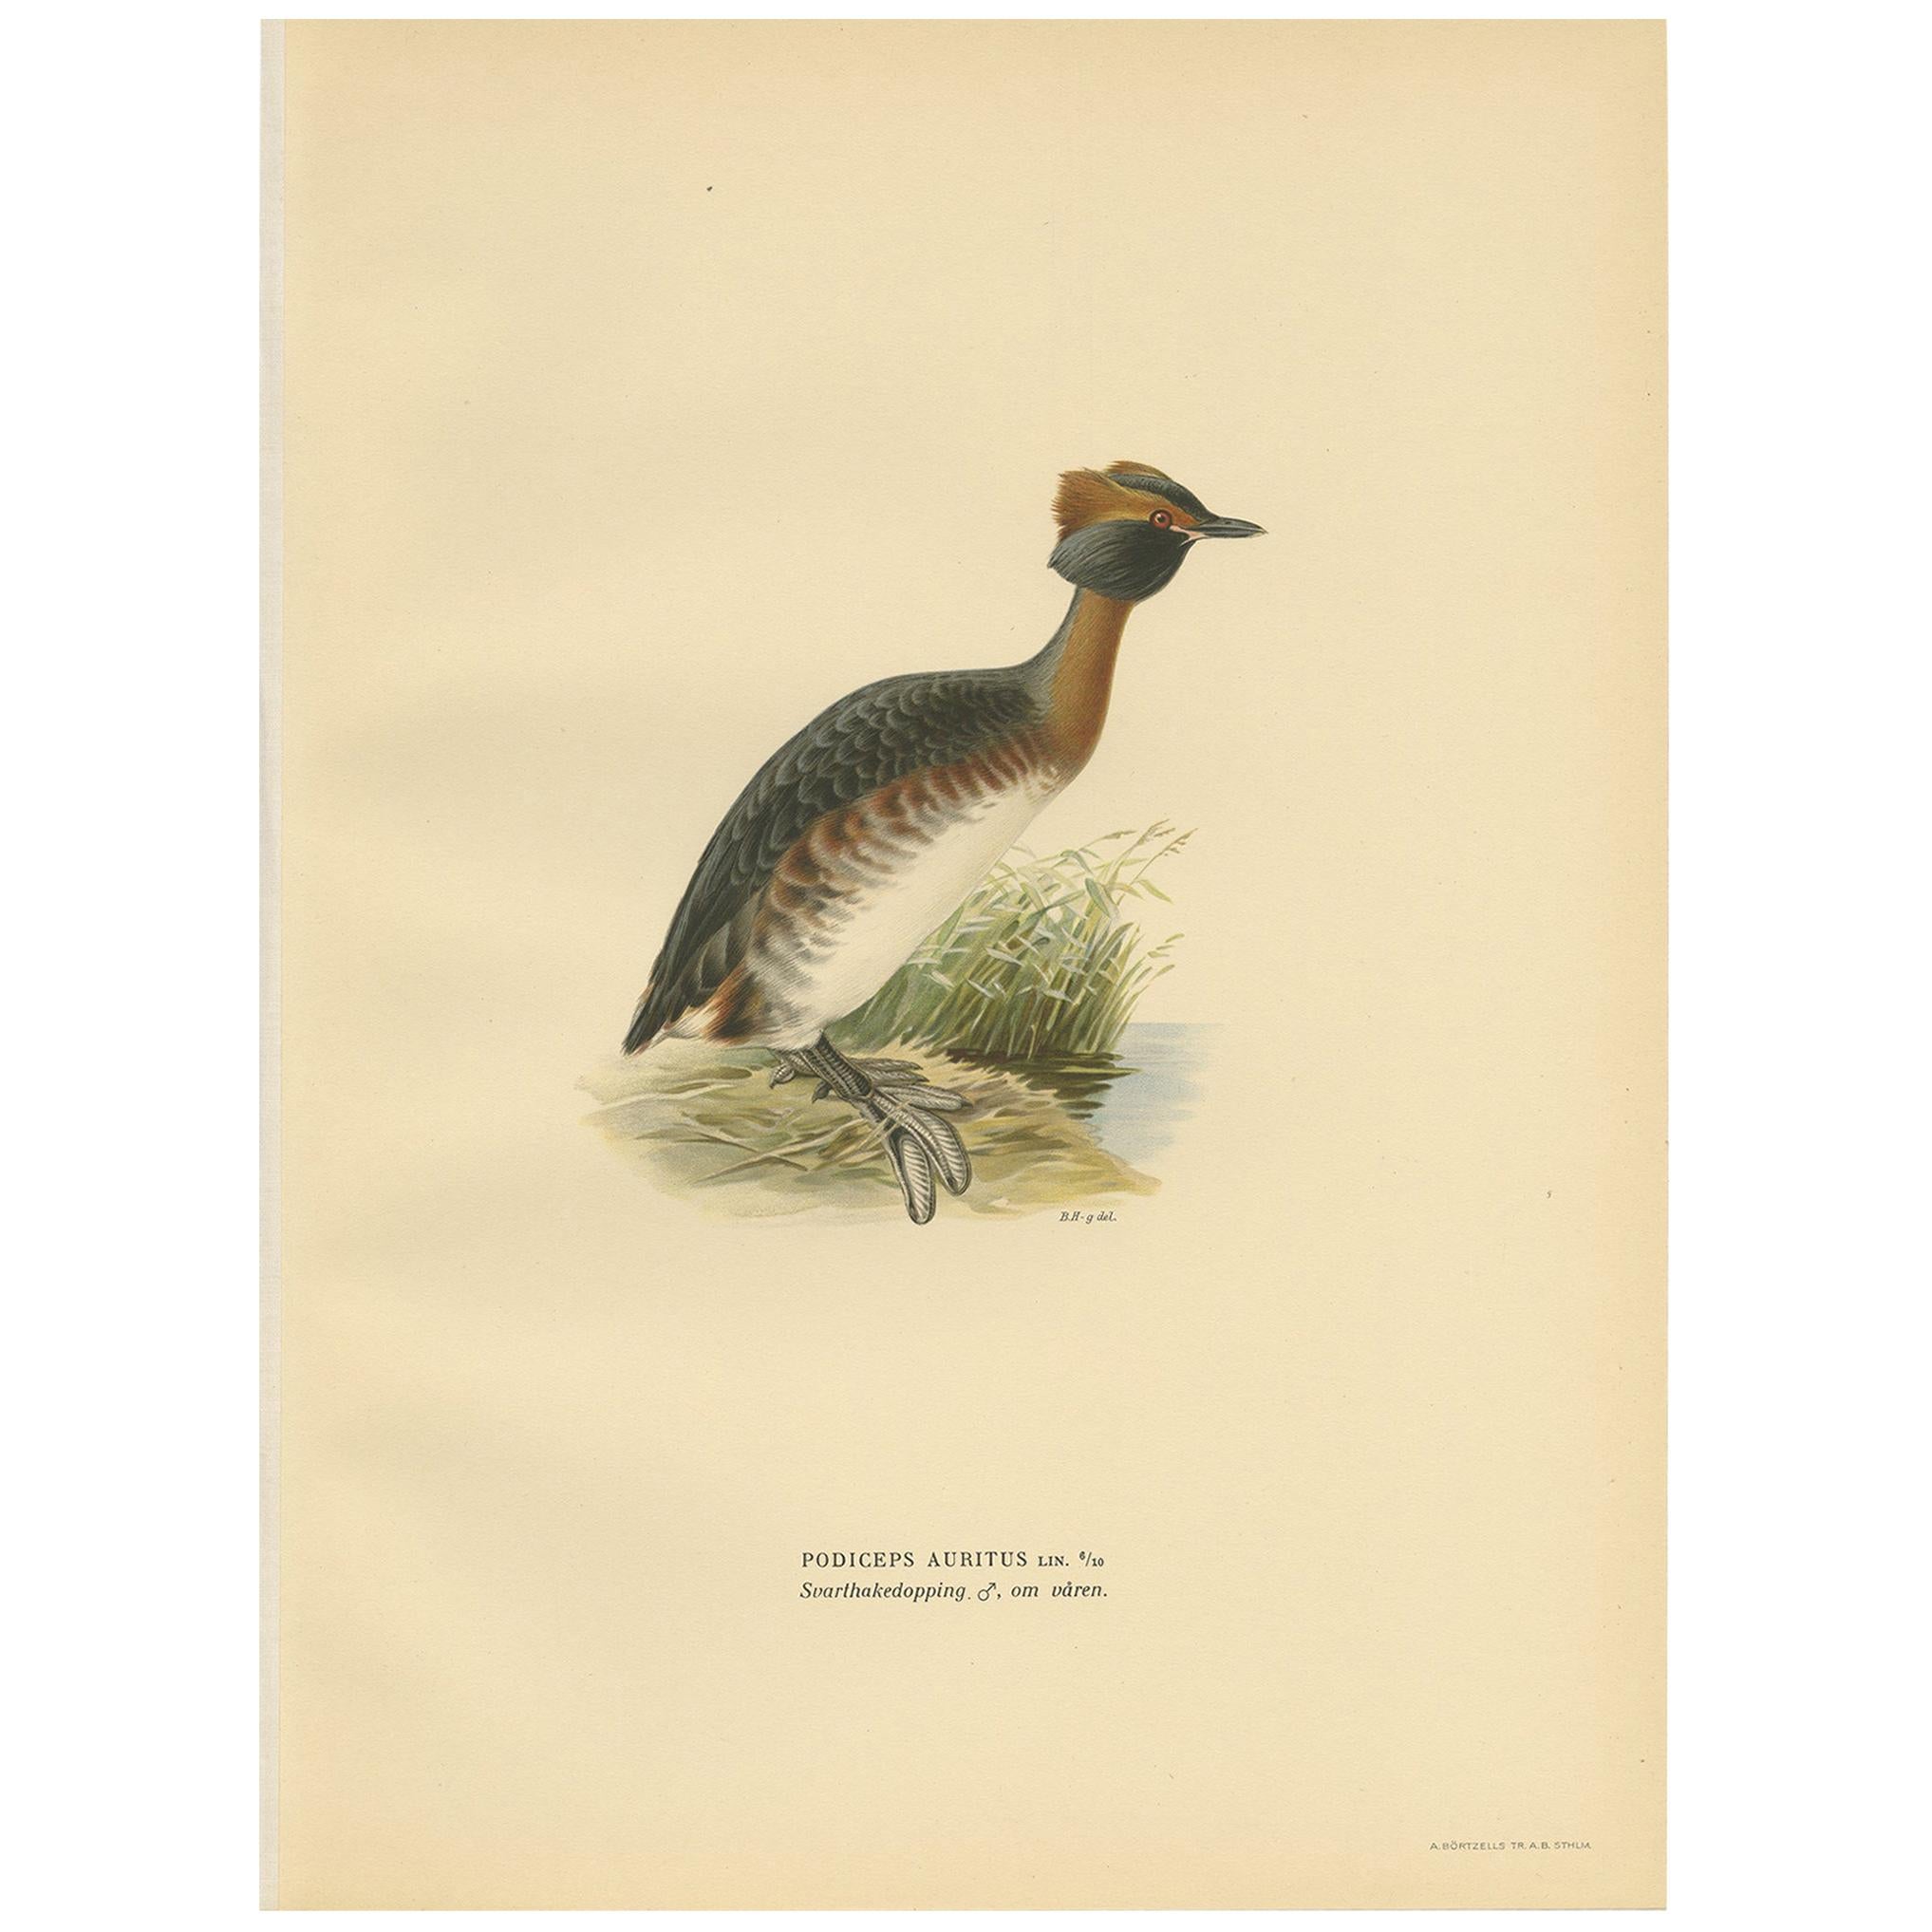 Antique Bird Print of the Horned Grebe by Von Wright, 1929